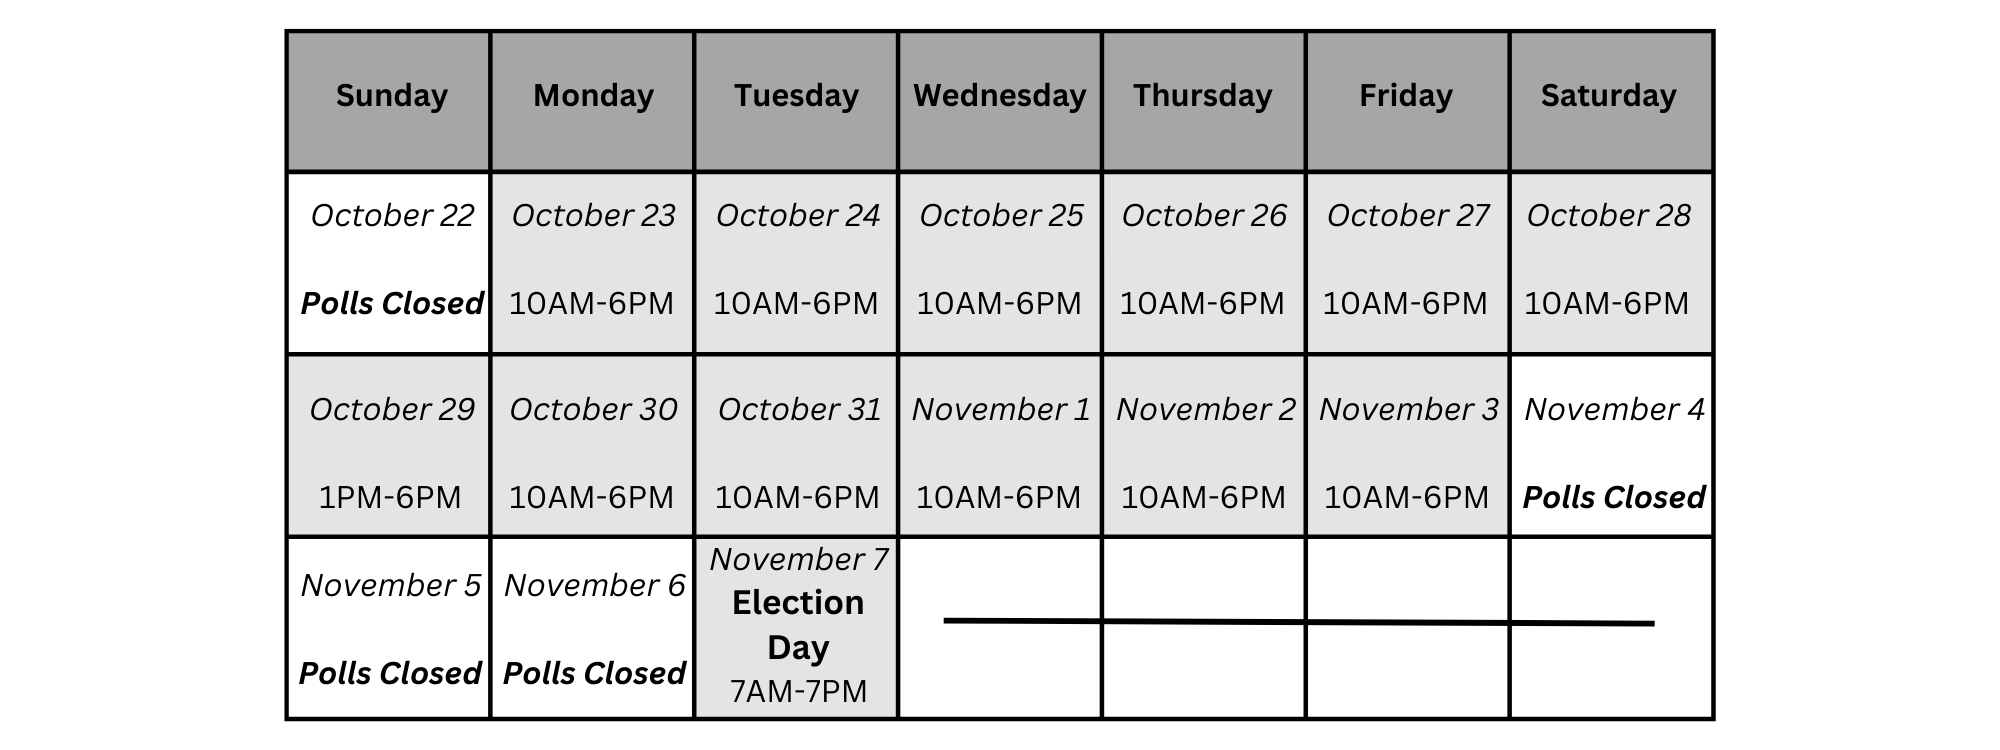 Voting Times